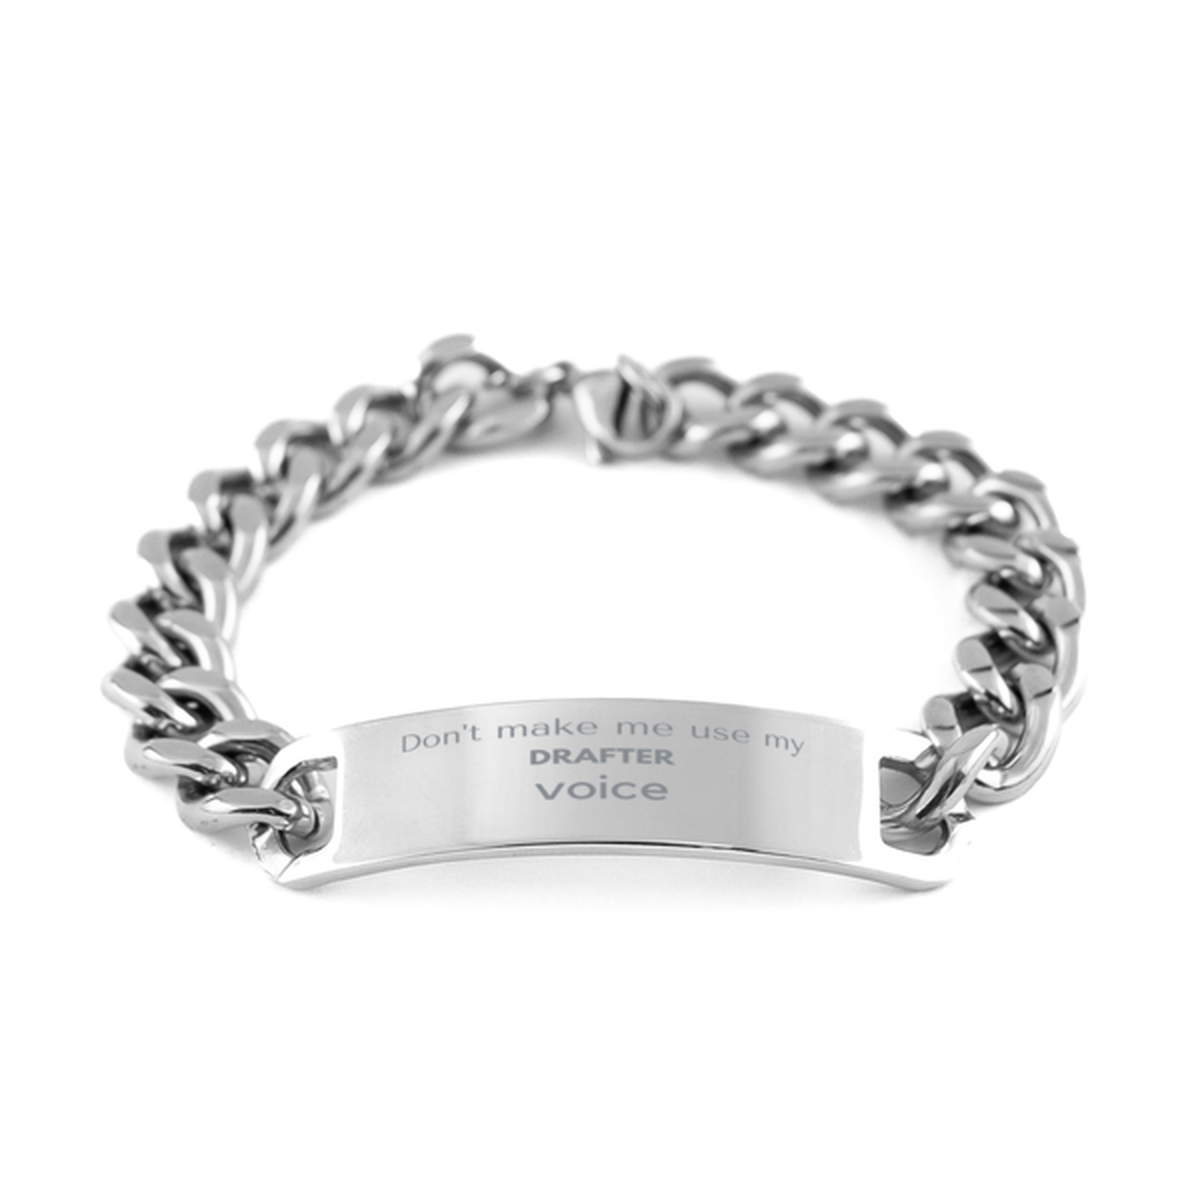 Don't make me use my Drafter voice, Sarcasm Drafter Gifts, Christmas Drafter Cuban Chain Stainless Steel Bracelet Birthday Unique Gifts For Drafter Coworkers, Men, Women, Colleague, Friends